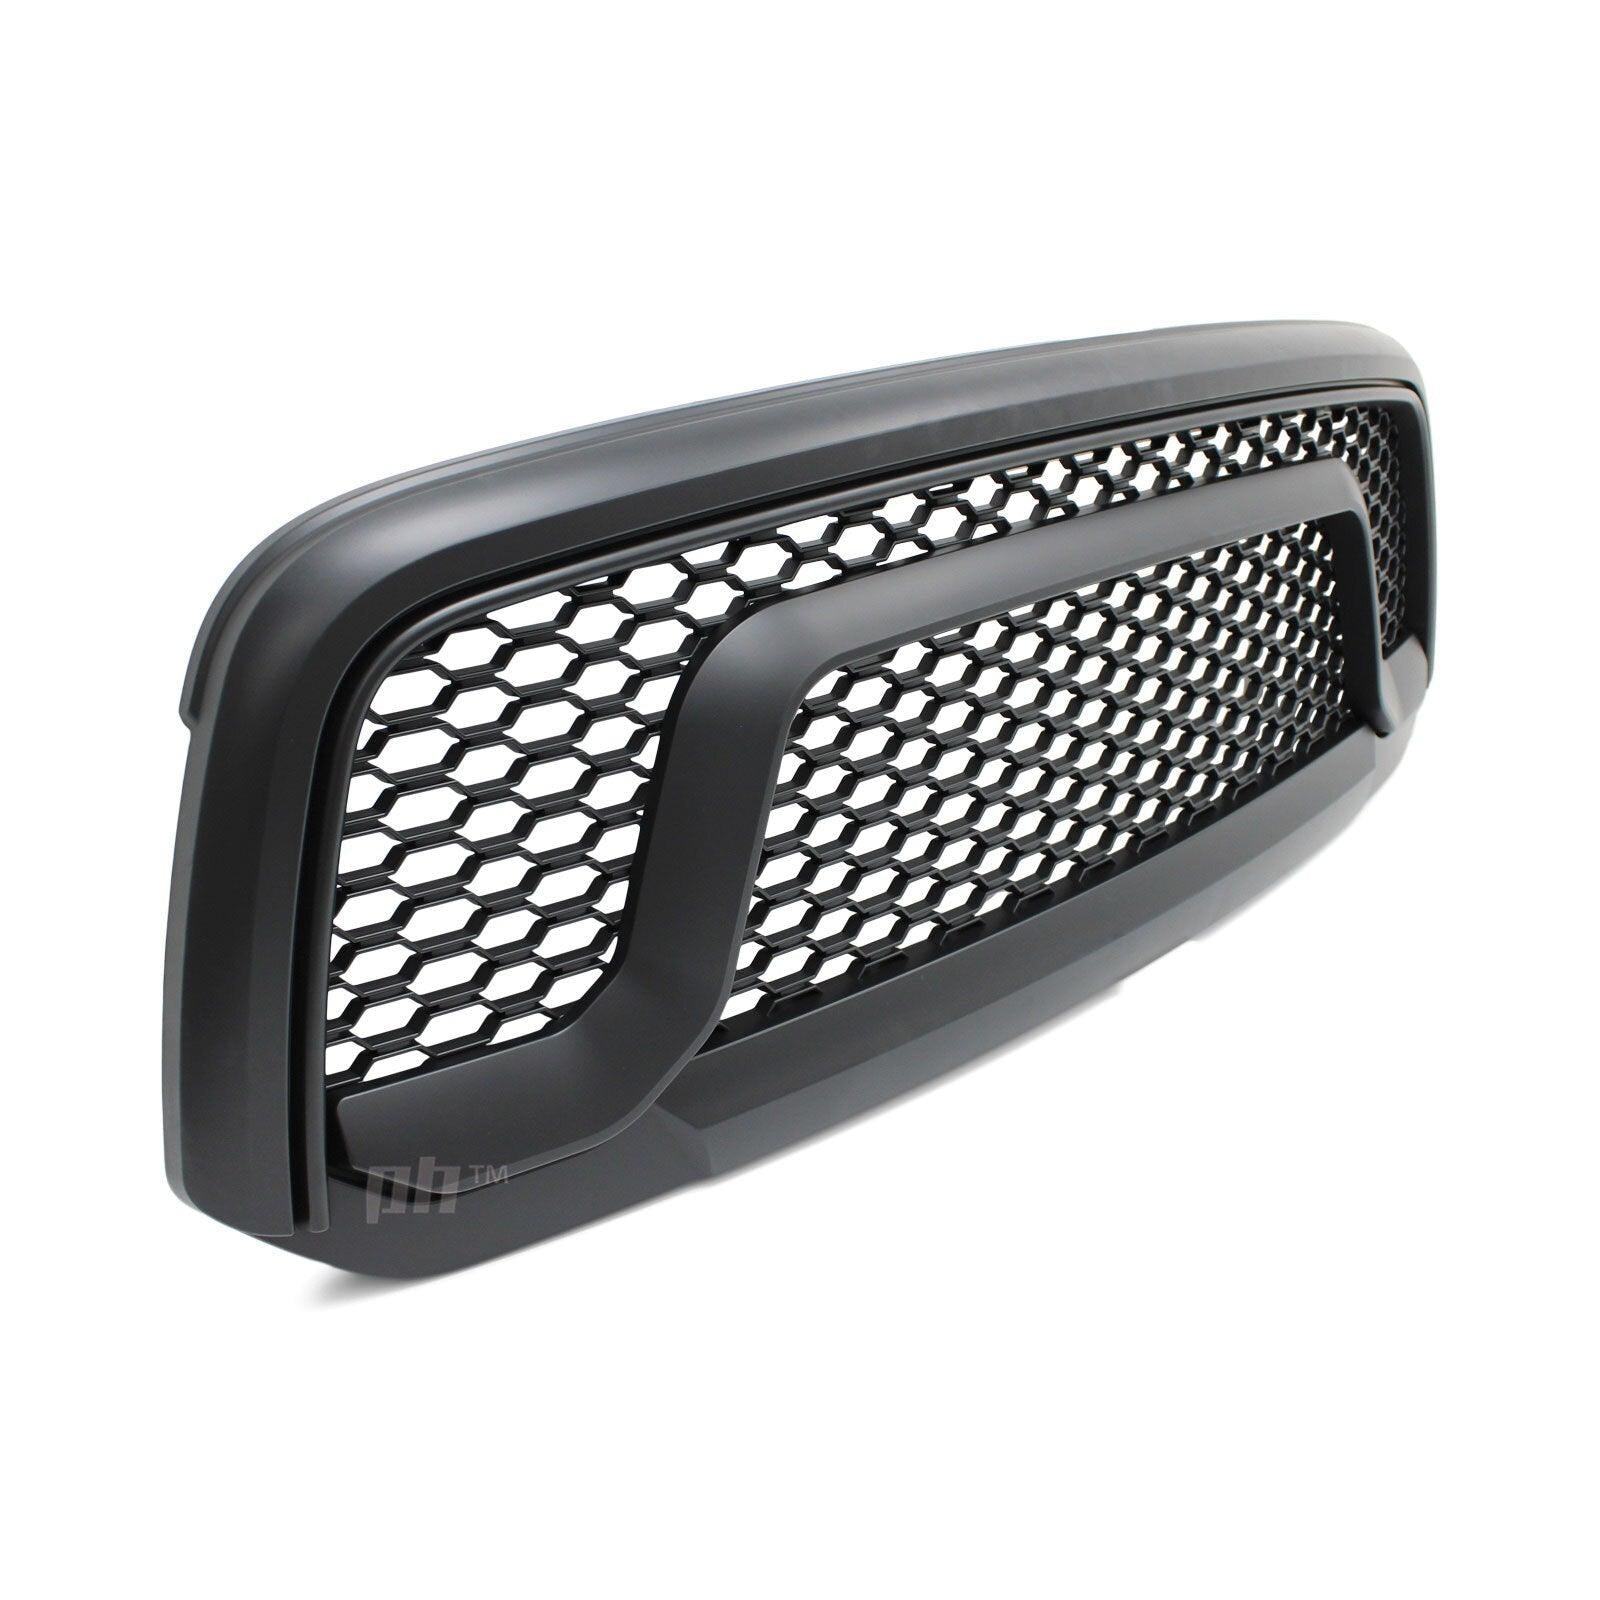 Panel House - Grill Black Edition Mesh Rebel Style fits Dodge RAM 1500 DS Laramie 2013 - 2018 - 4X4OC™ | 4x4 Offroad Centre